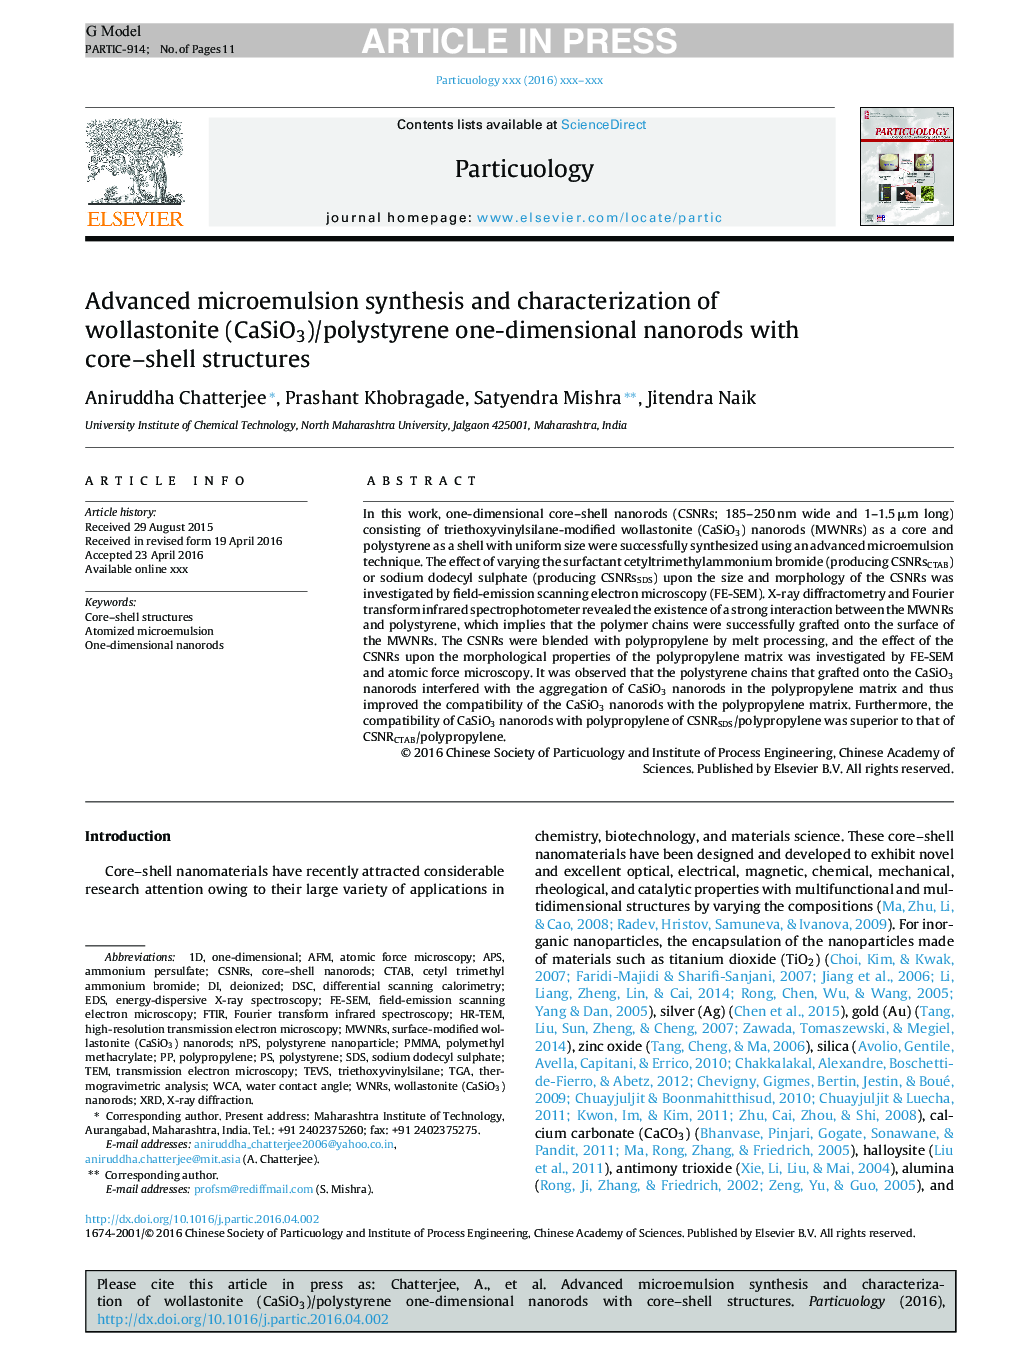 Advanced microemulsion synthesis and characterization of wollastonite (CaSiO3)/polystyrene one-dimensional nanorods with core-shell structures